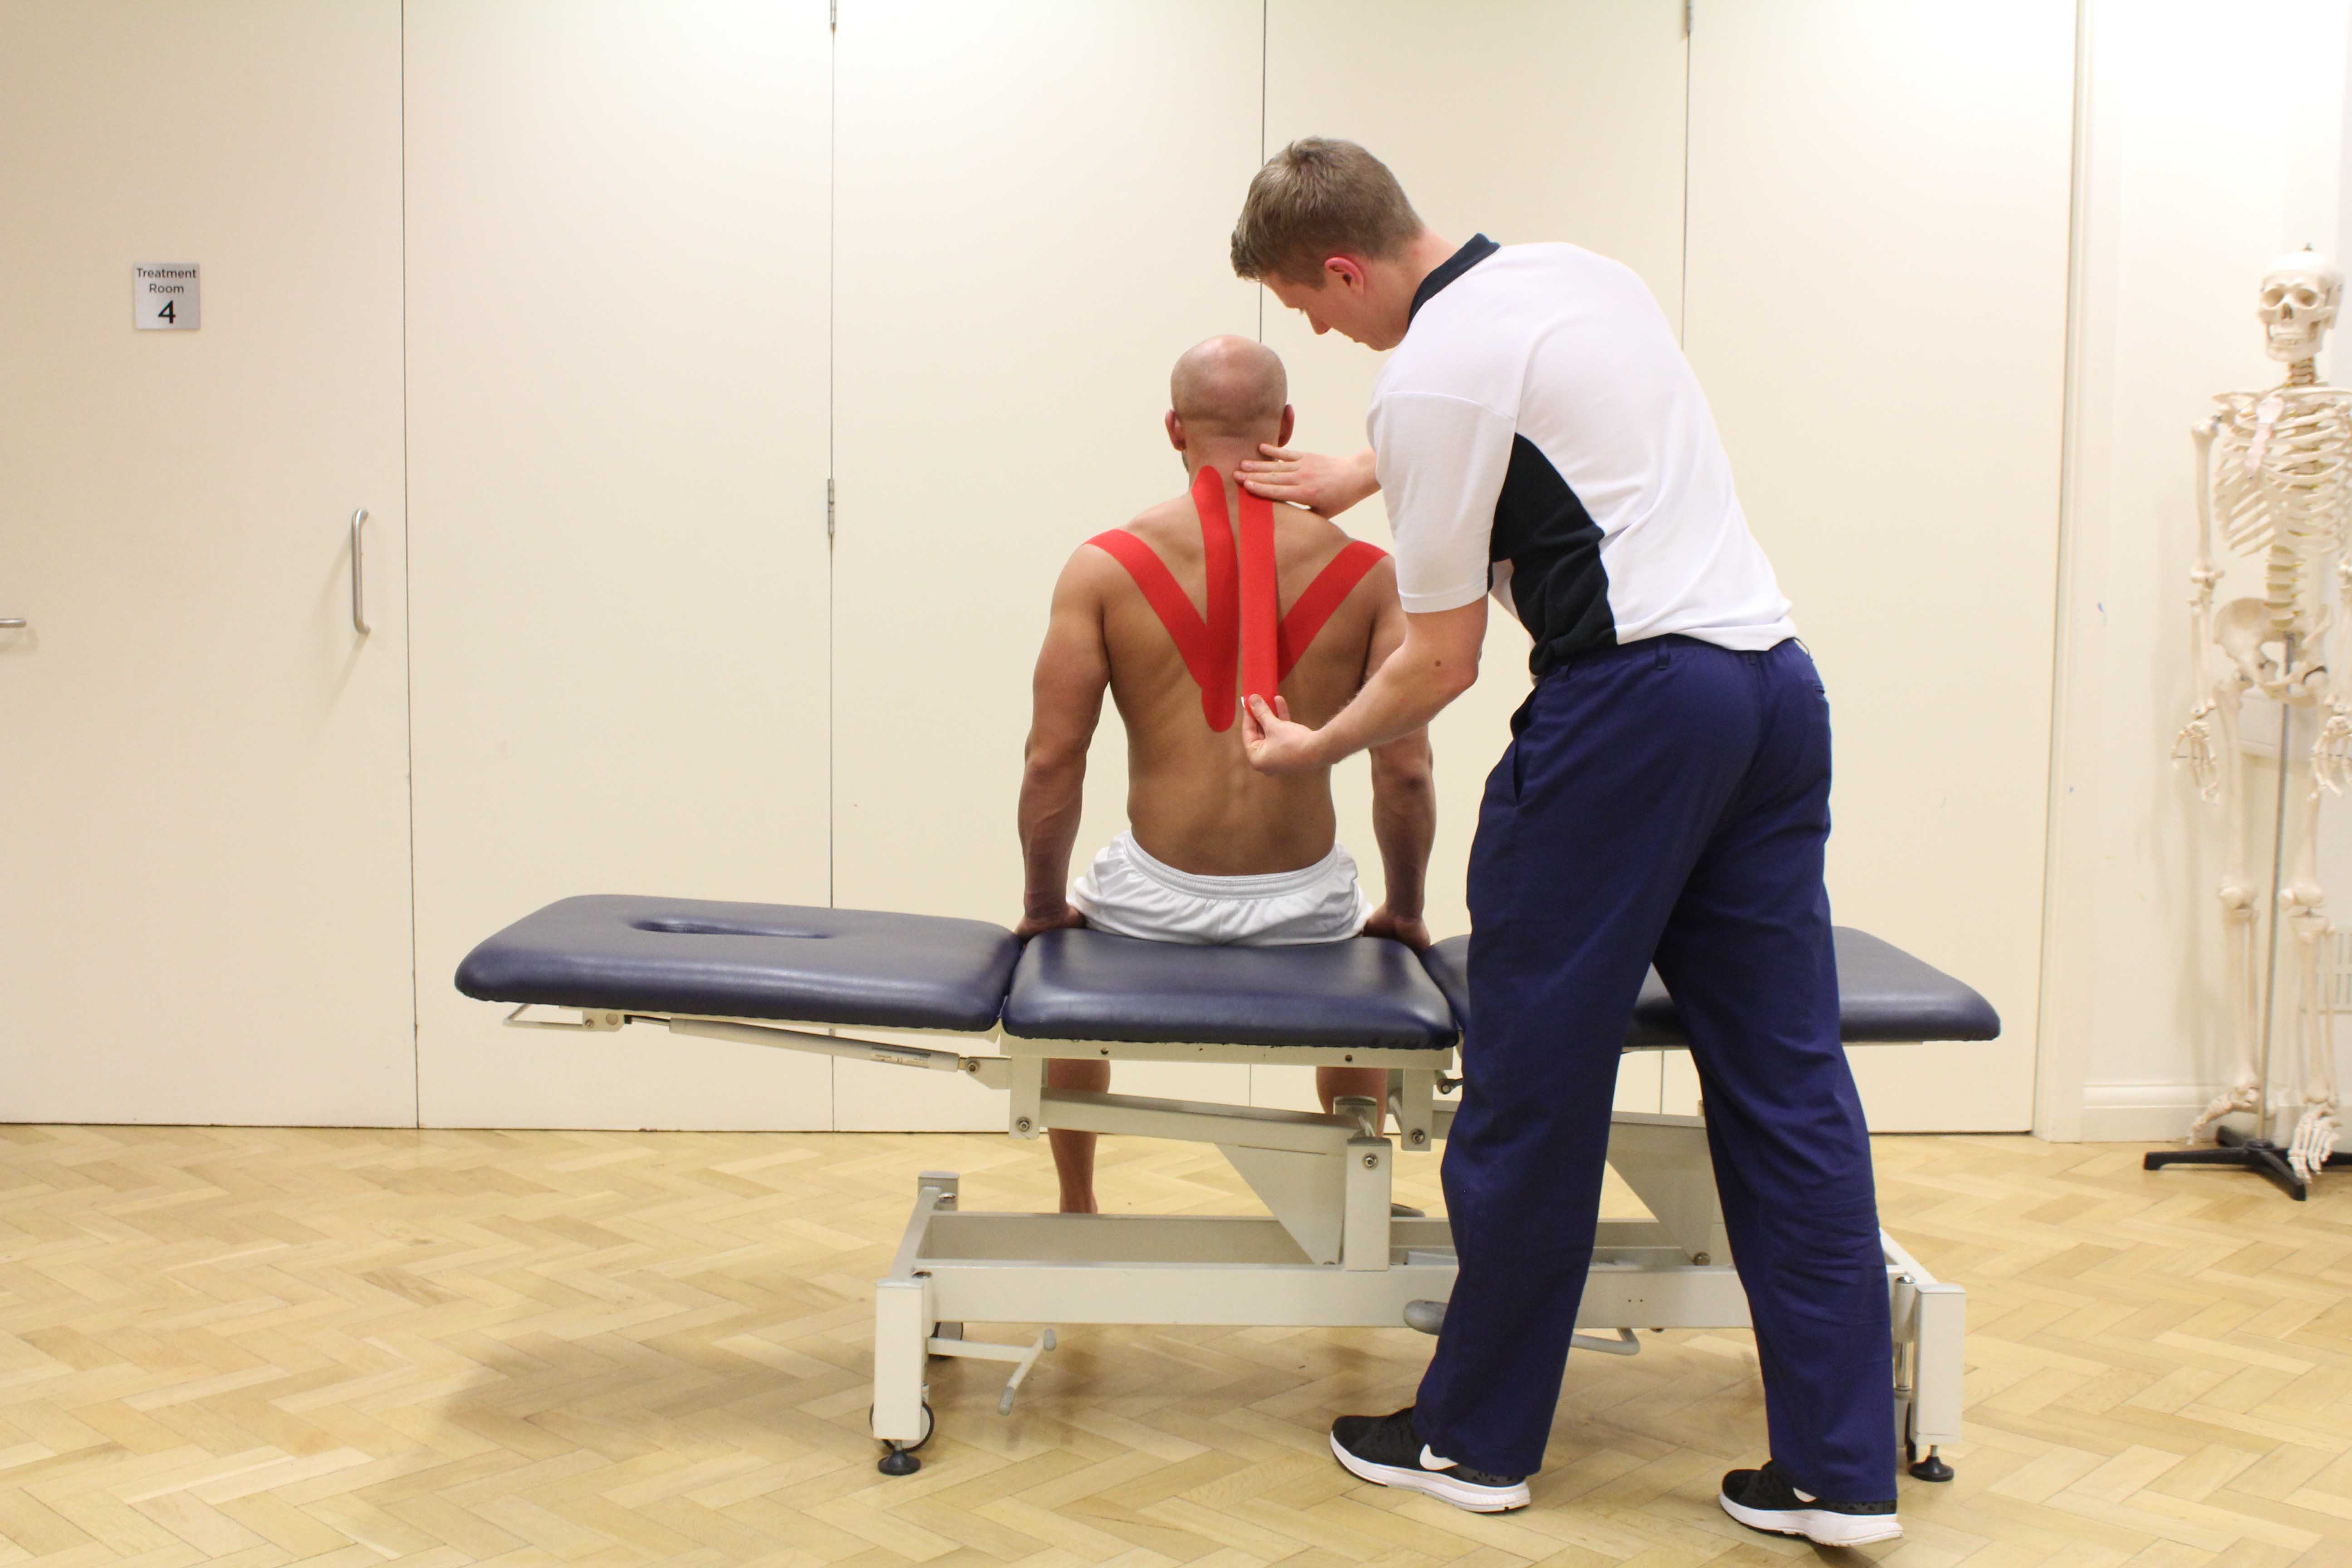 Experienced Physiotherapist using specialist tape to support and stabilise movement across the shoulders